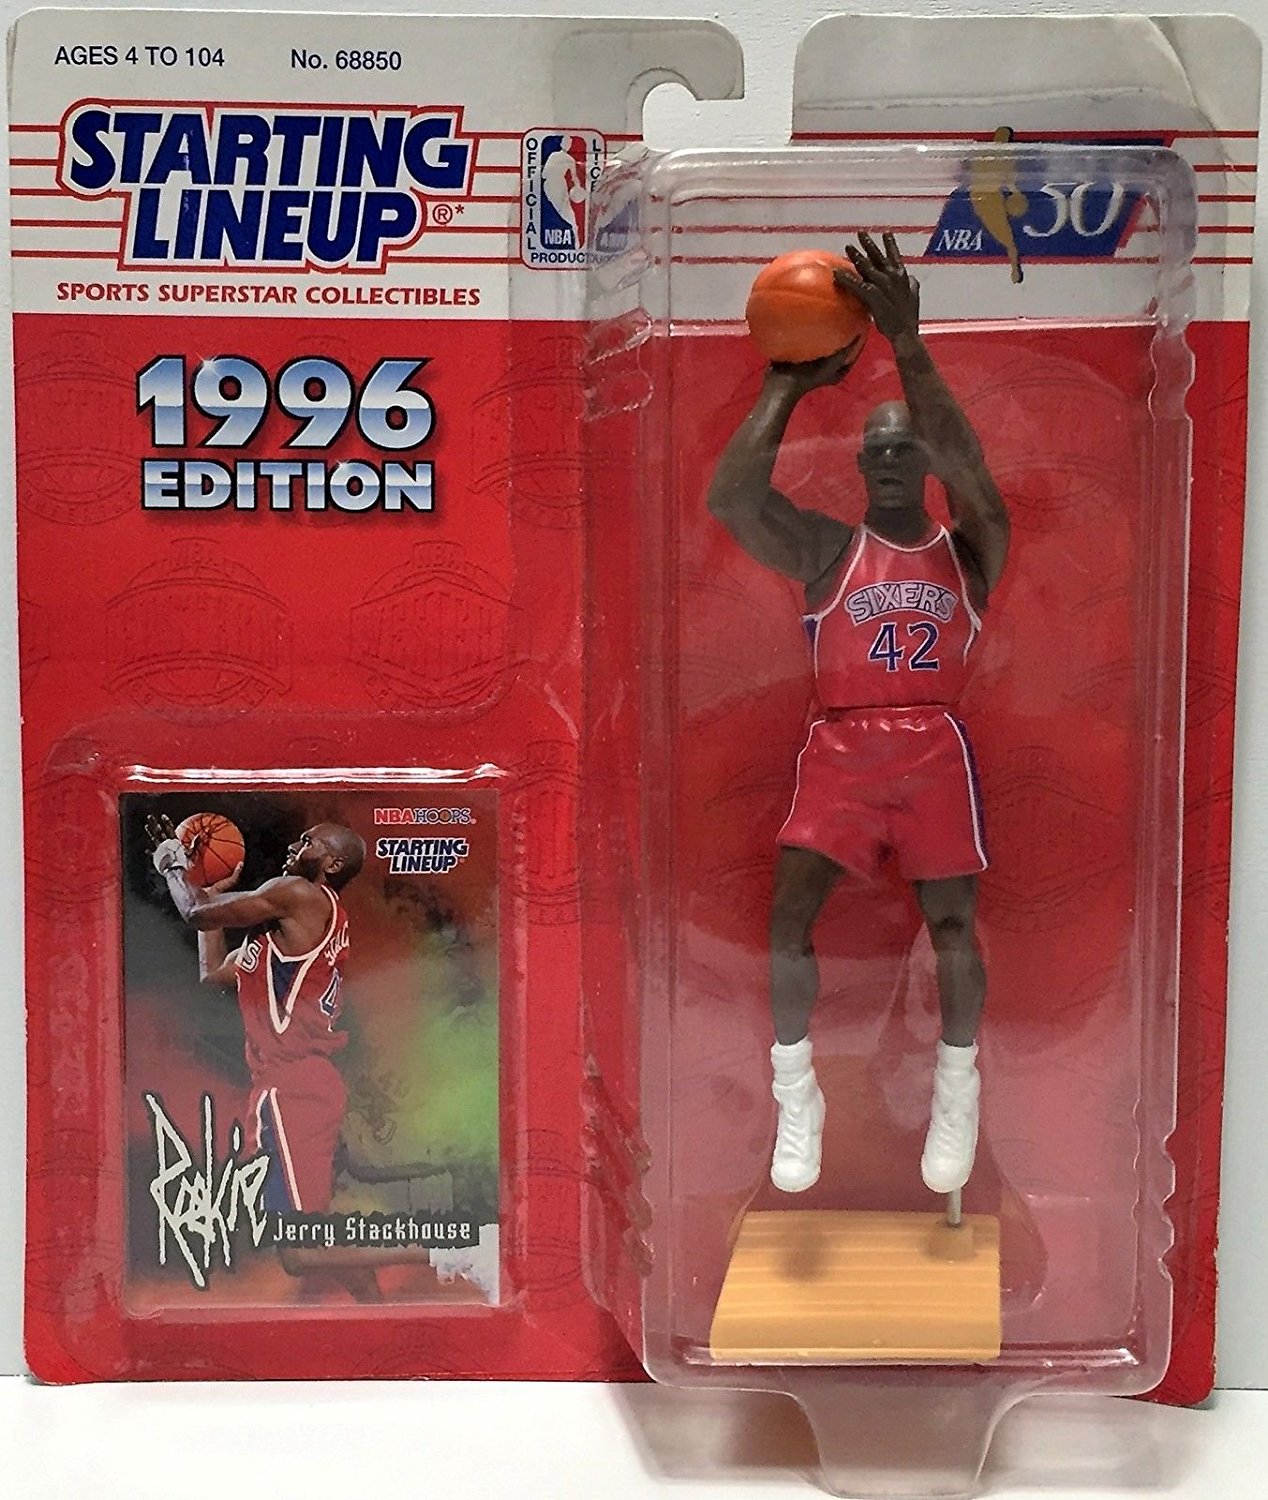 Jerry Stackhouse 1996 Edition Starting Lineup Philadelphia 76ers NBA Action Figure with Rookie Card